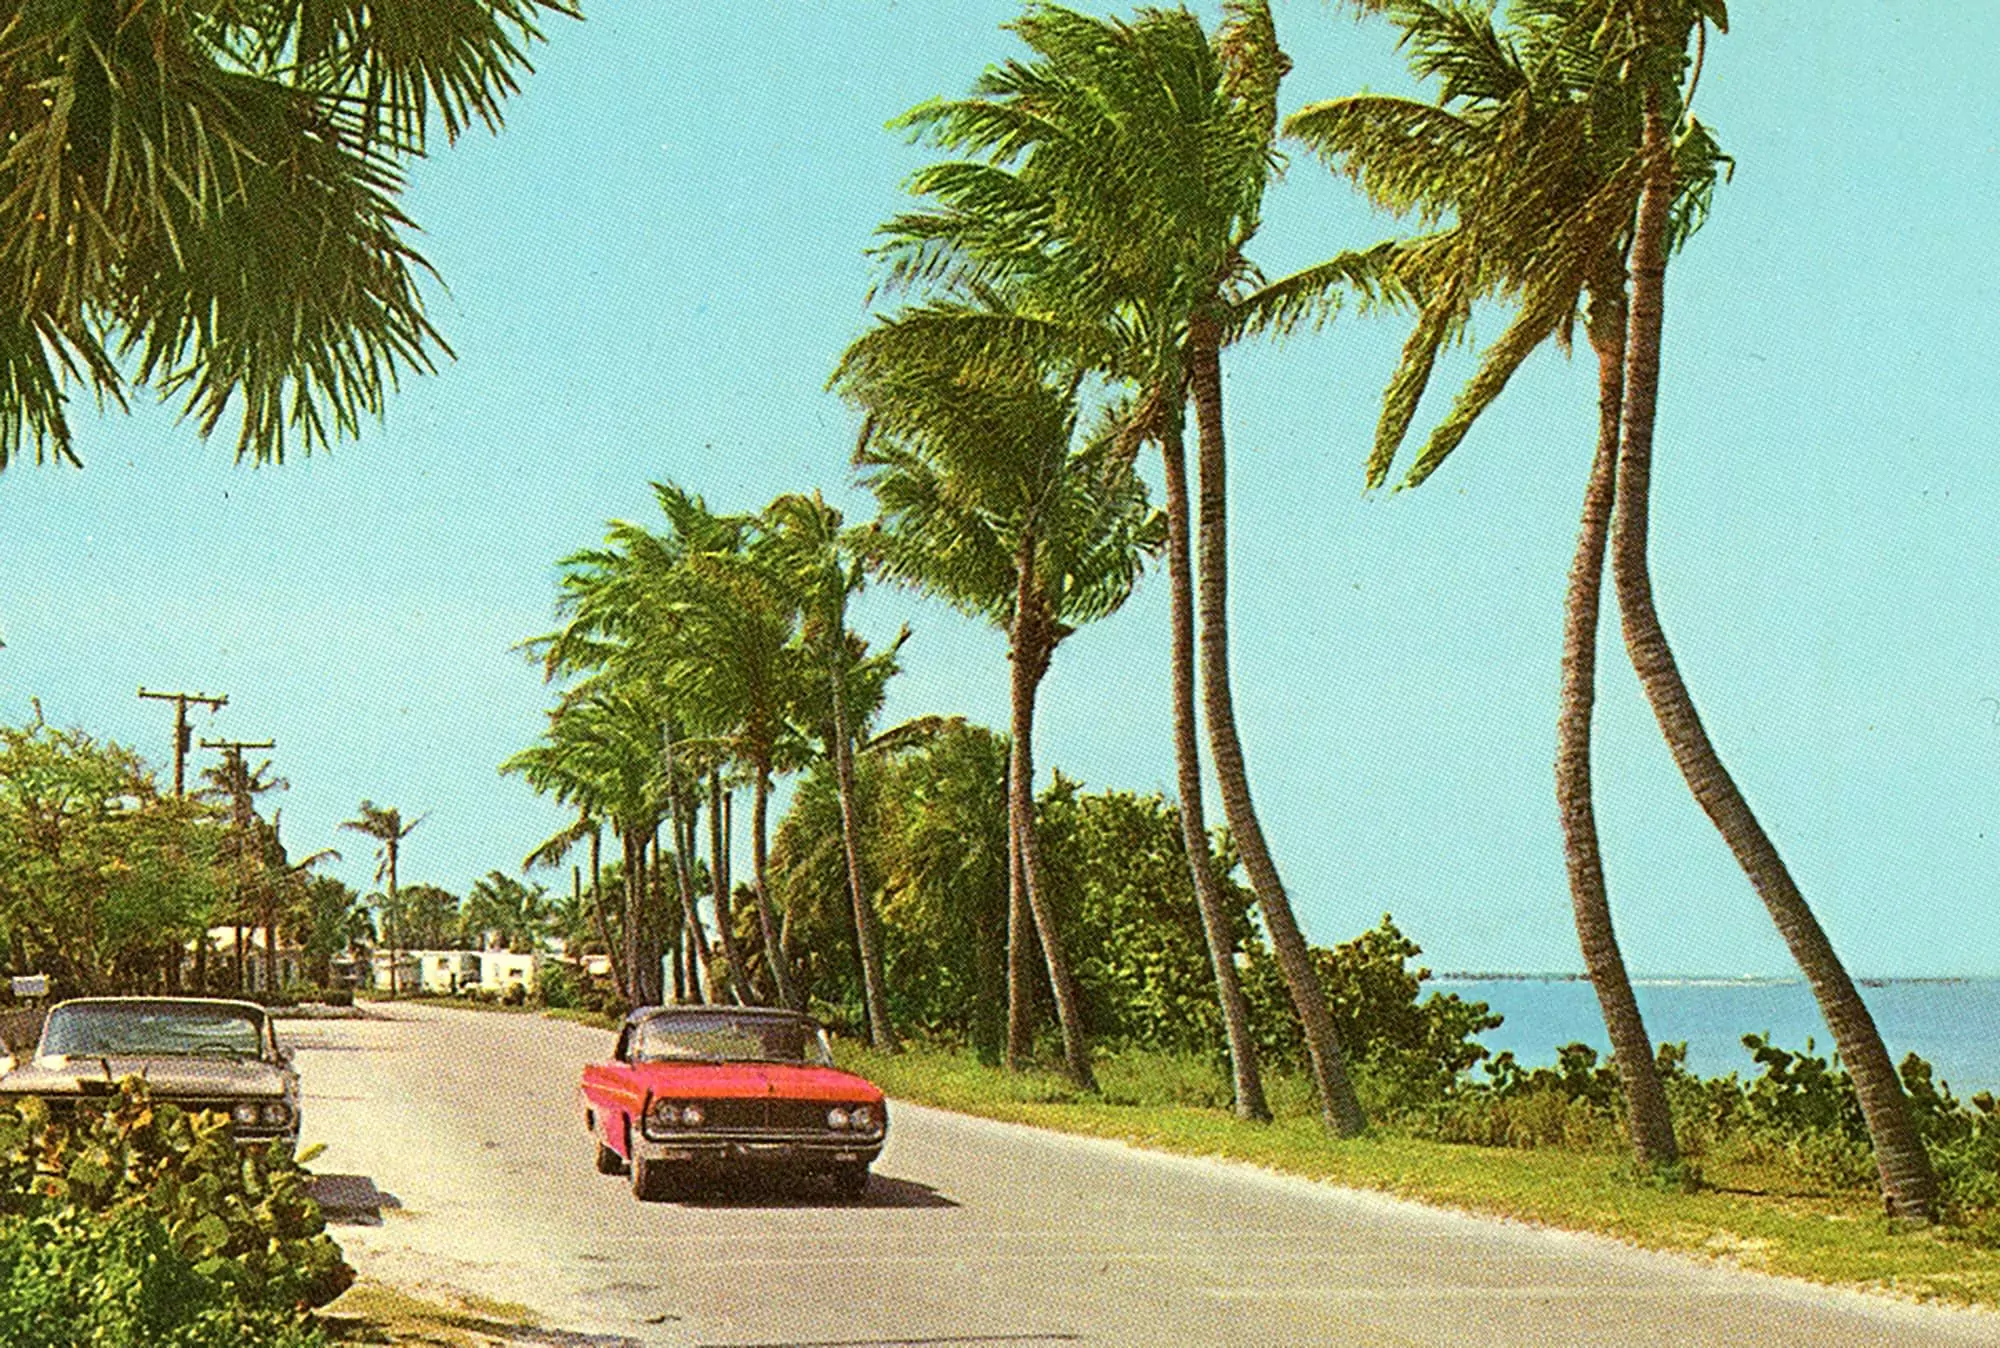 Indian River Drive between Jensen Beach and Stuart, Florida. 1964. State Archives of Florida, Florida Memory